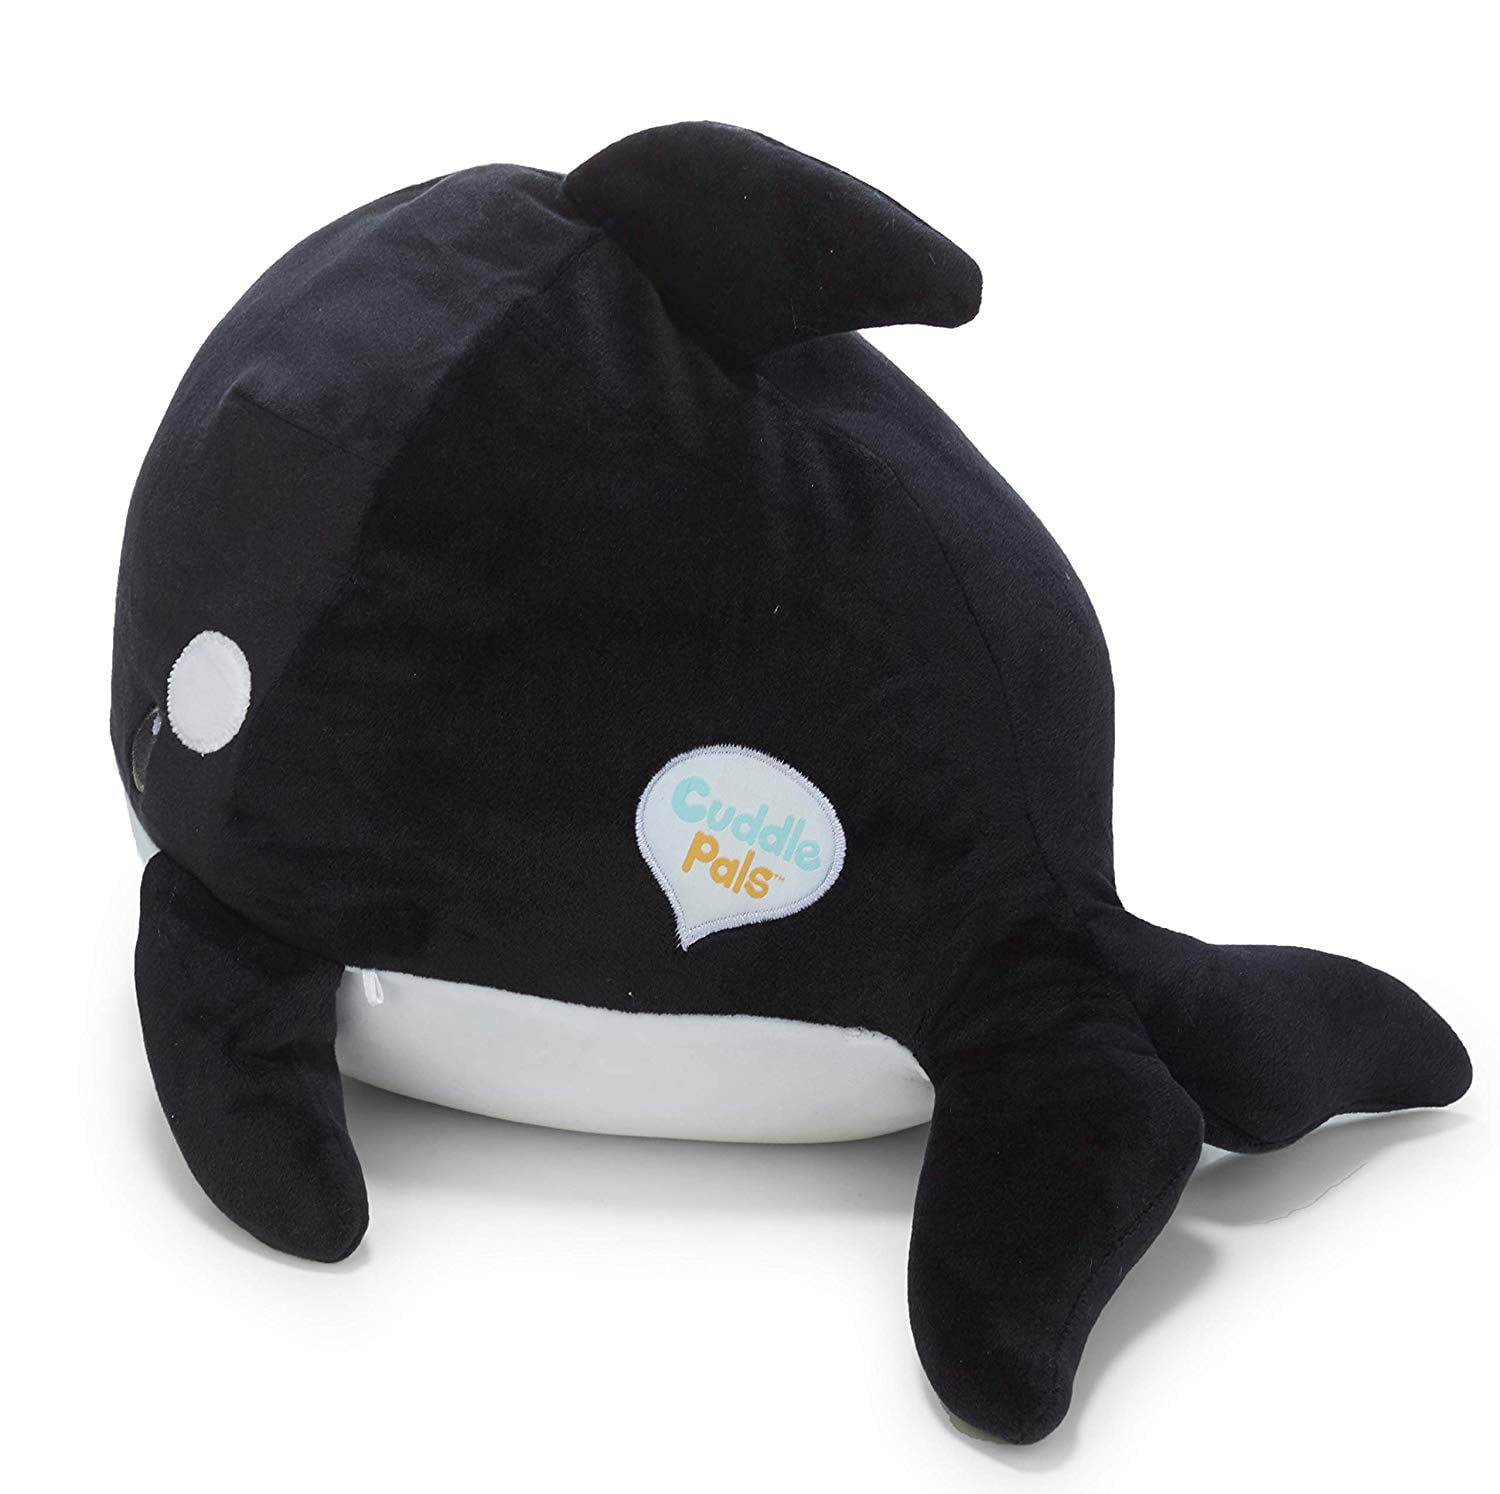 NIGHTBUDDIES OLIVER THE ORCA WHALE EYES LIGHT UP MY NIGHT BUDDIES PET PILLOW NEW 